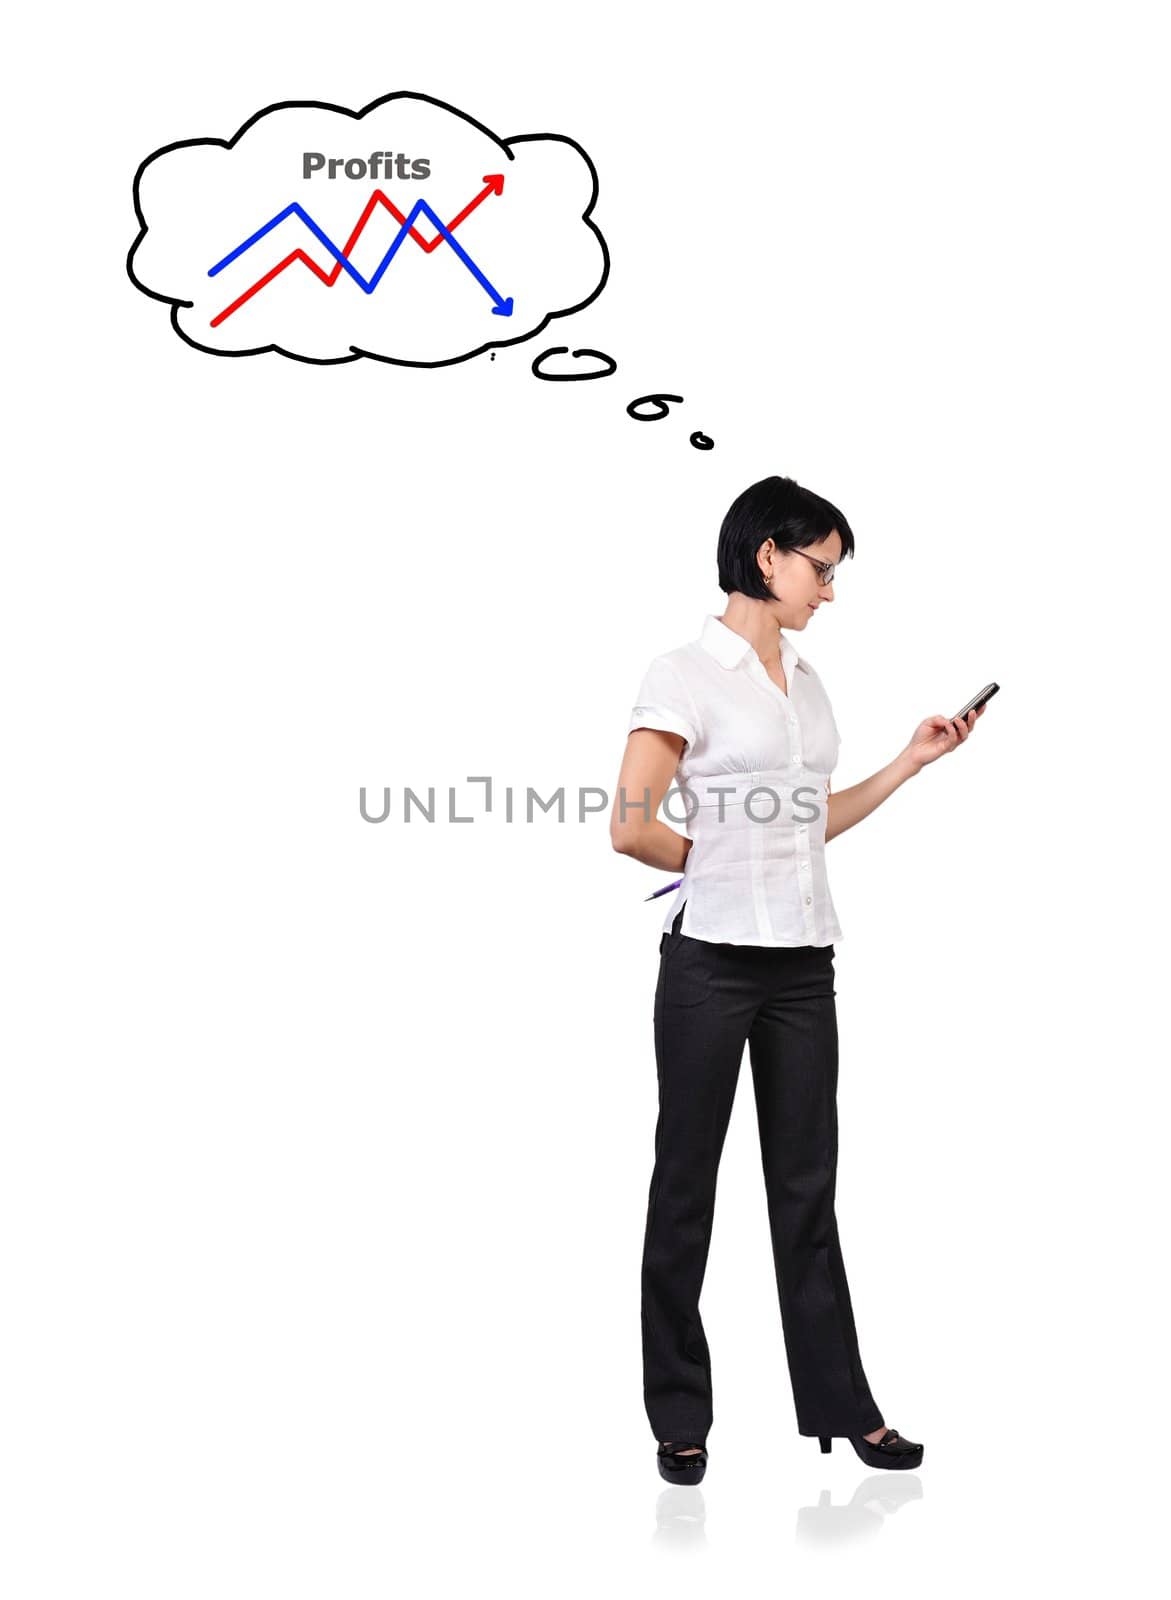 young girl with a phone and dreaming, business concept